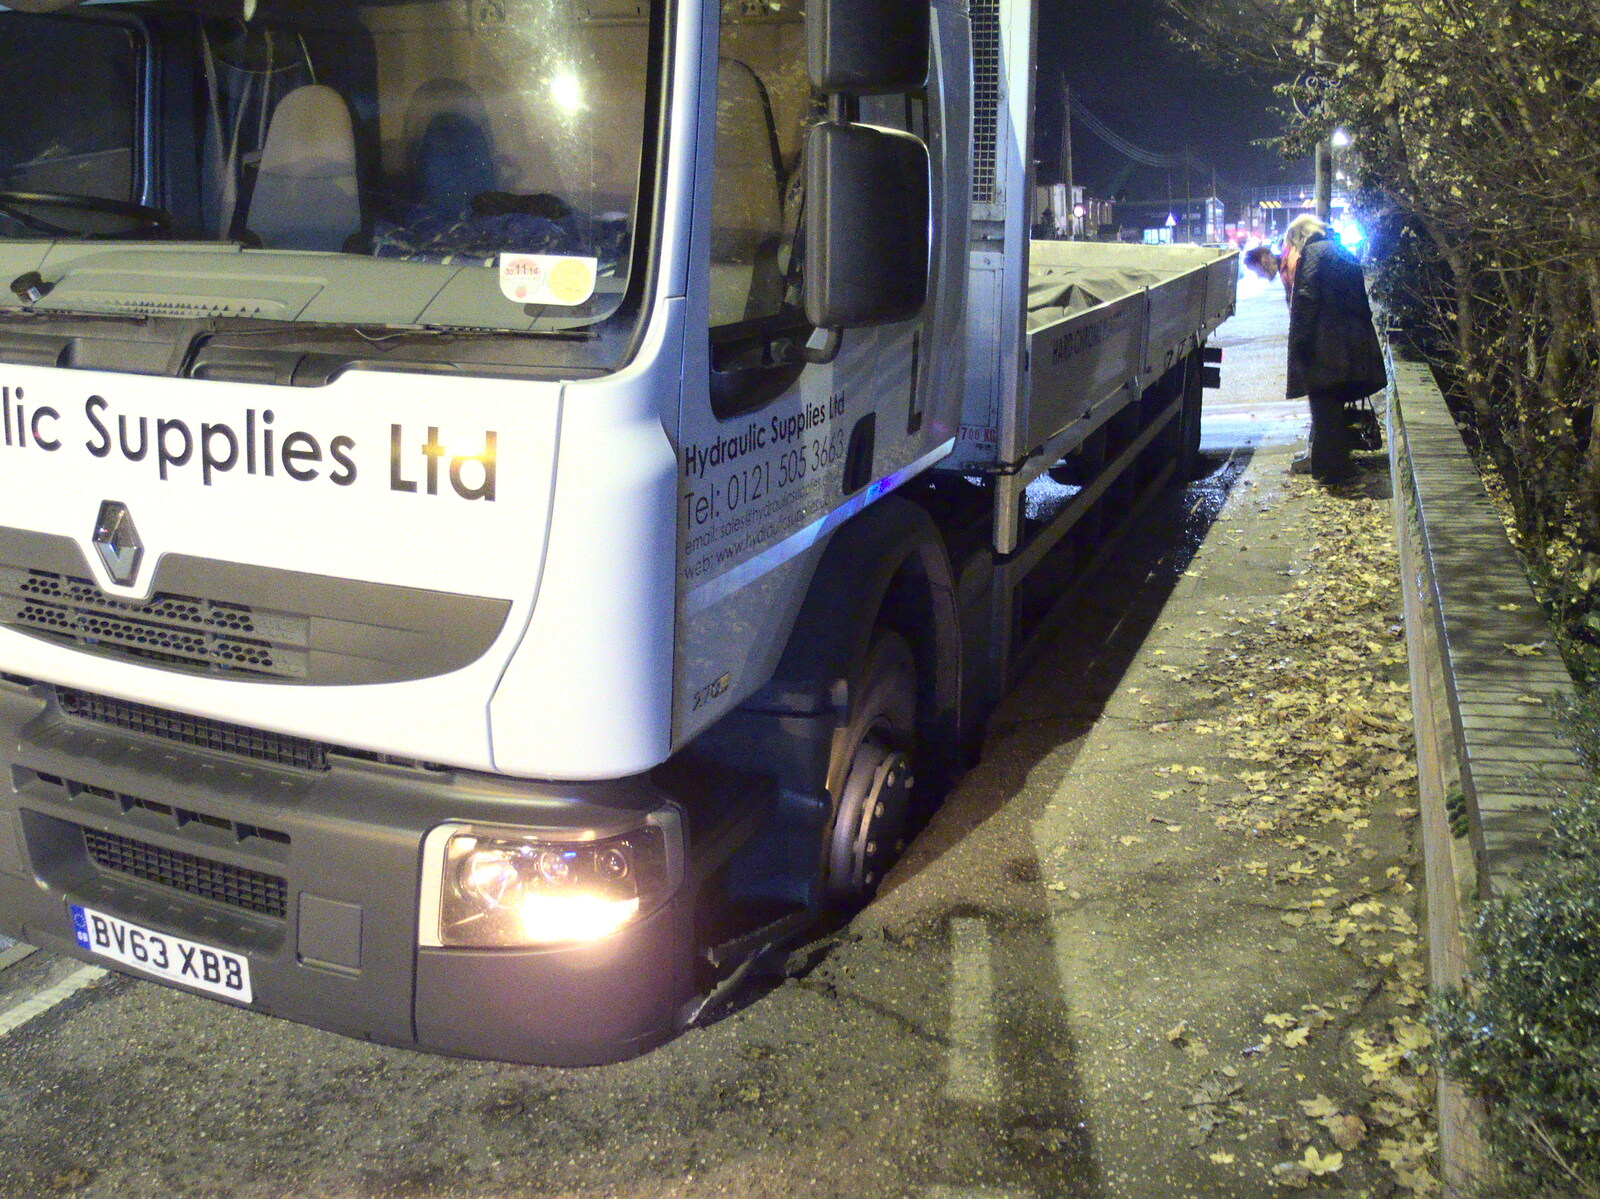 The lorry has both wheels sunk in to the pavement from The Lorry-Eating Pavement of Diss, Norfolk - 3rd December